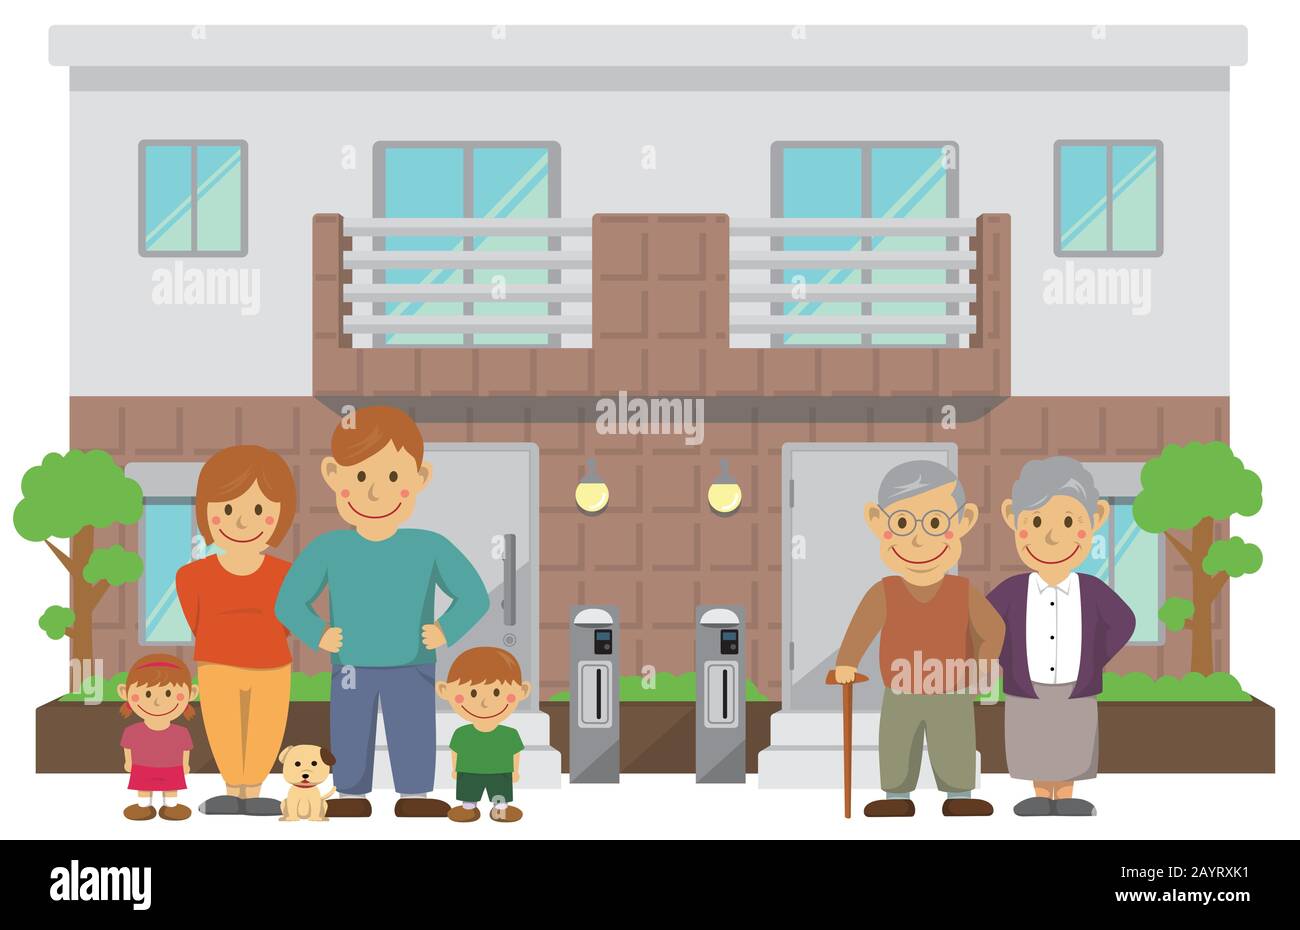 two families home / duplex home. 3 generation family illustration. Stock Vector